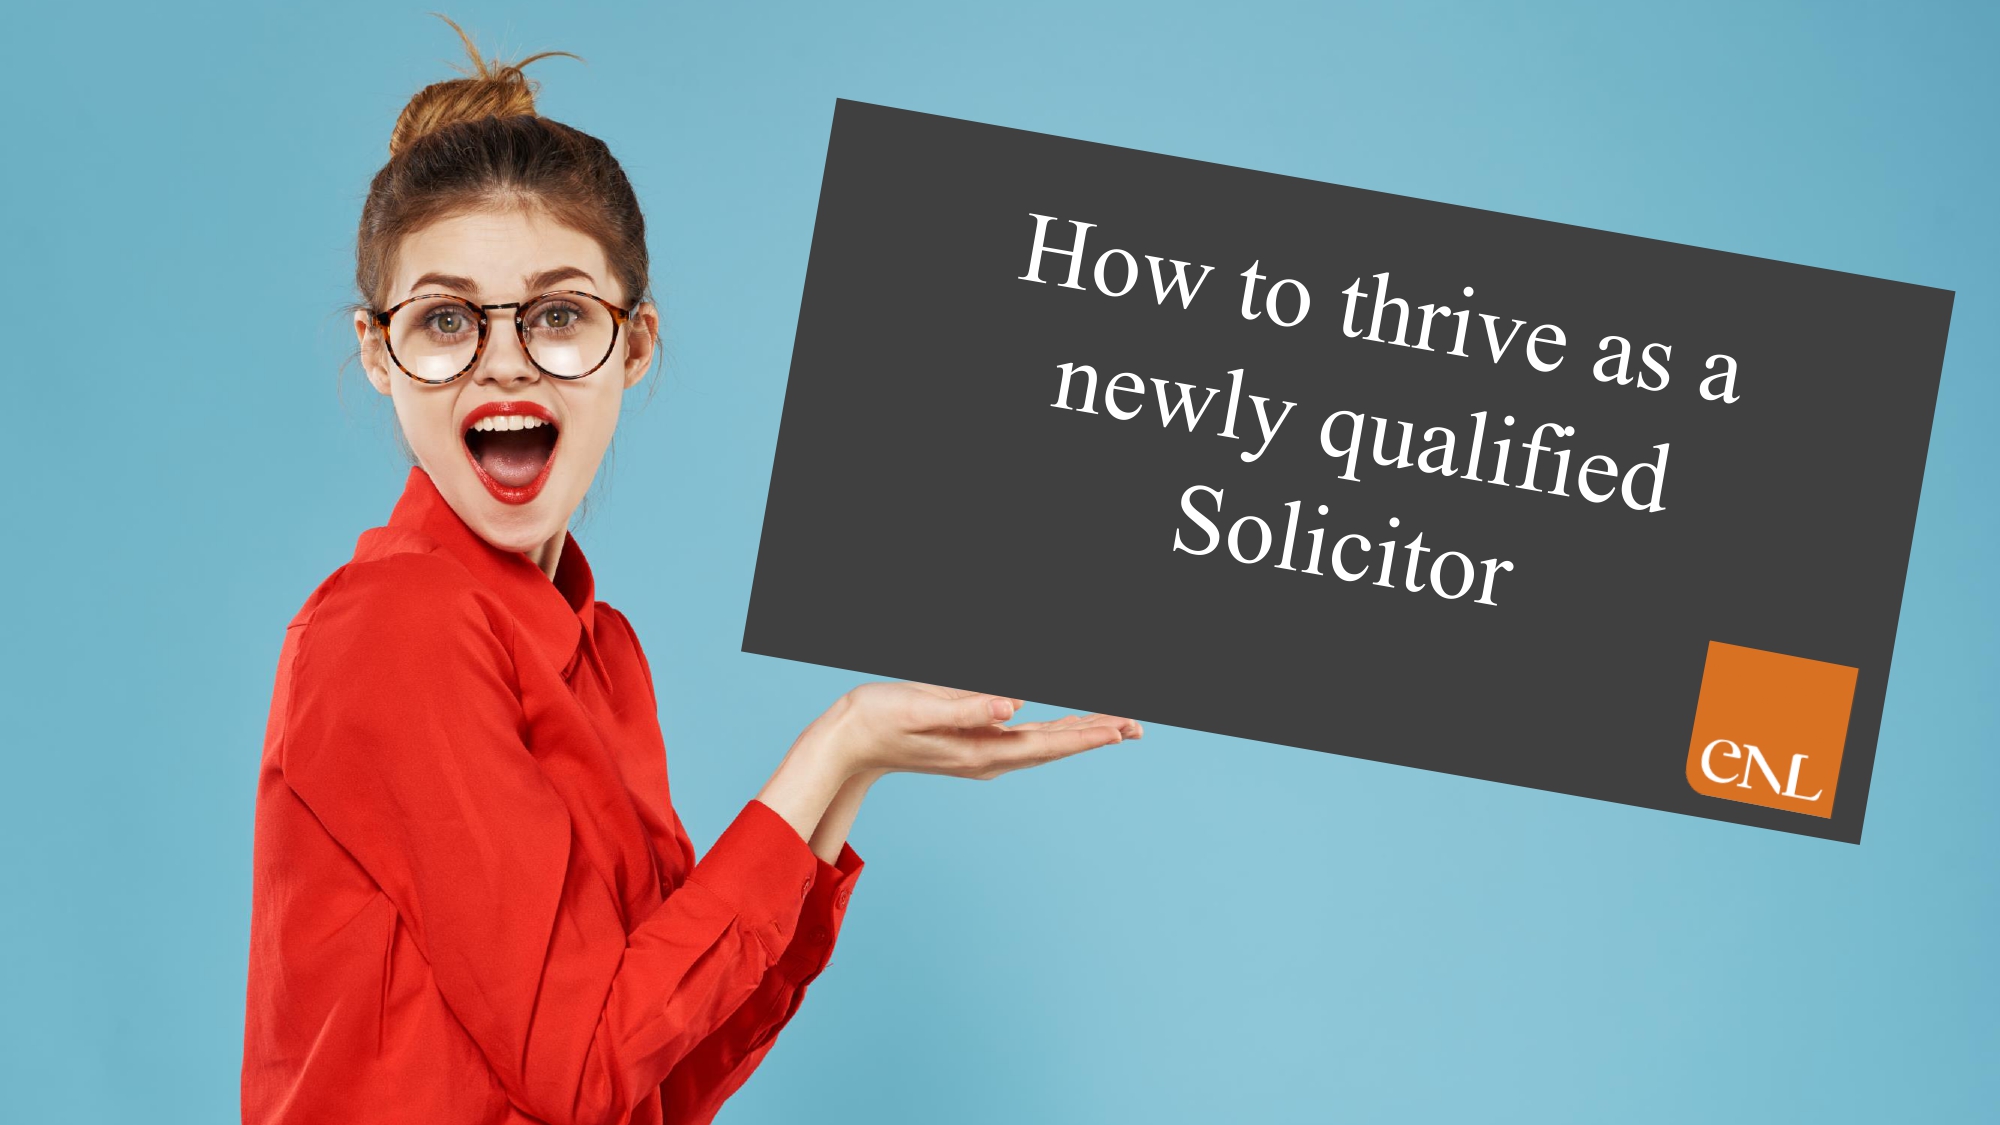 How to thrive as a newly qualified Solicitor